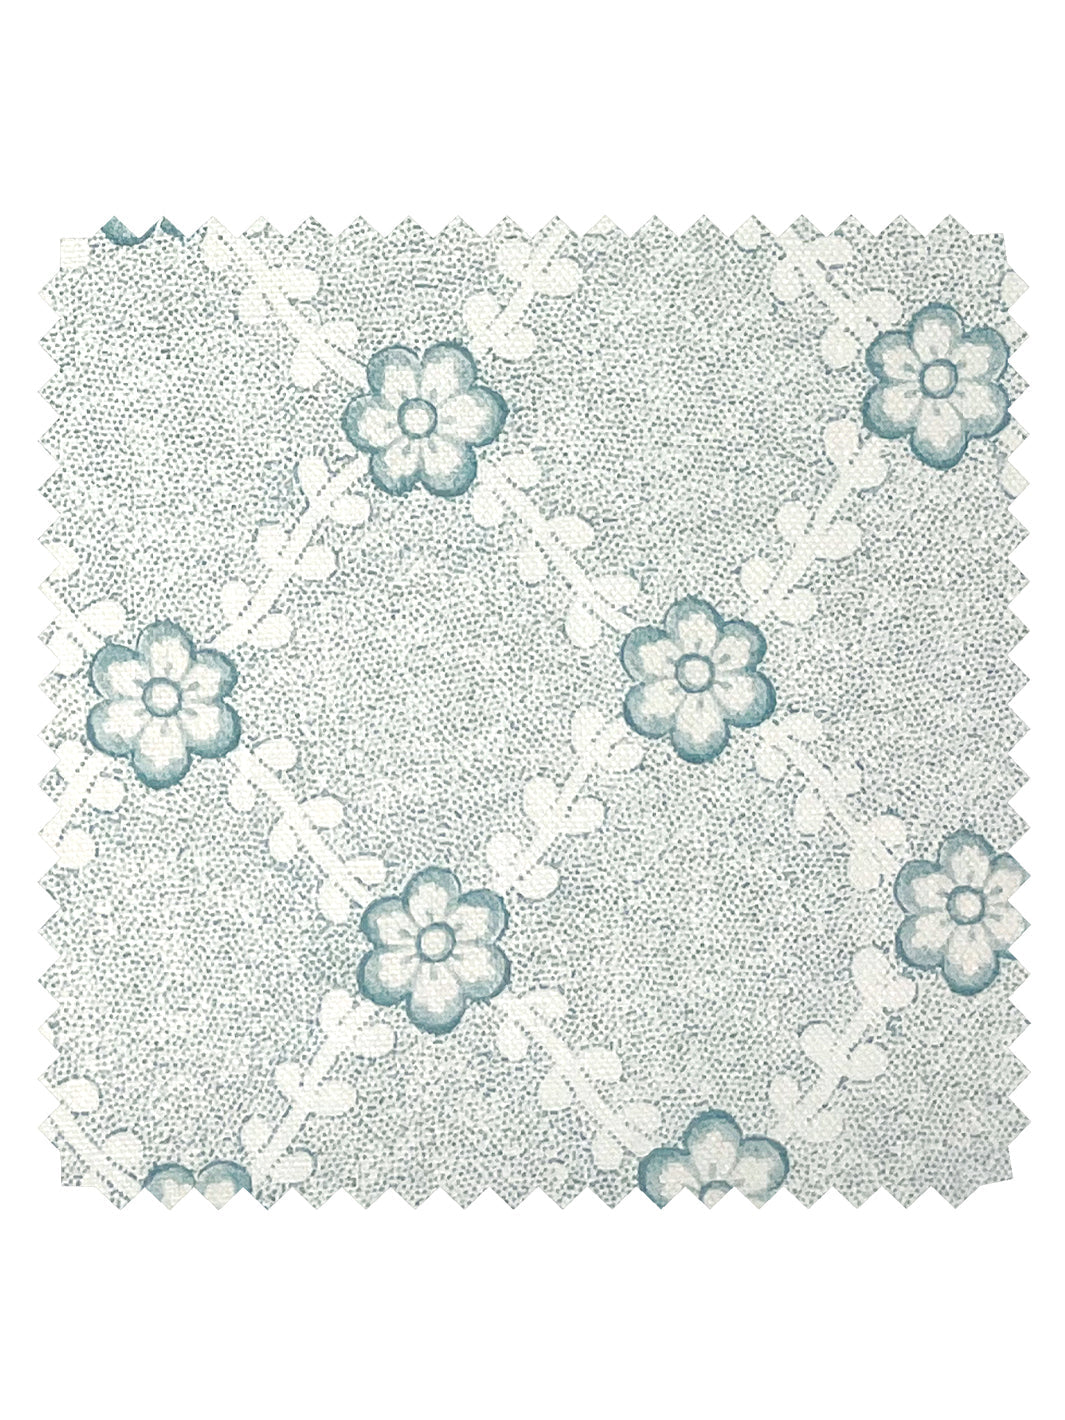 'Lucia' Linen Fabric by Nathan Turner - Seafoam